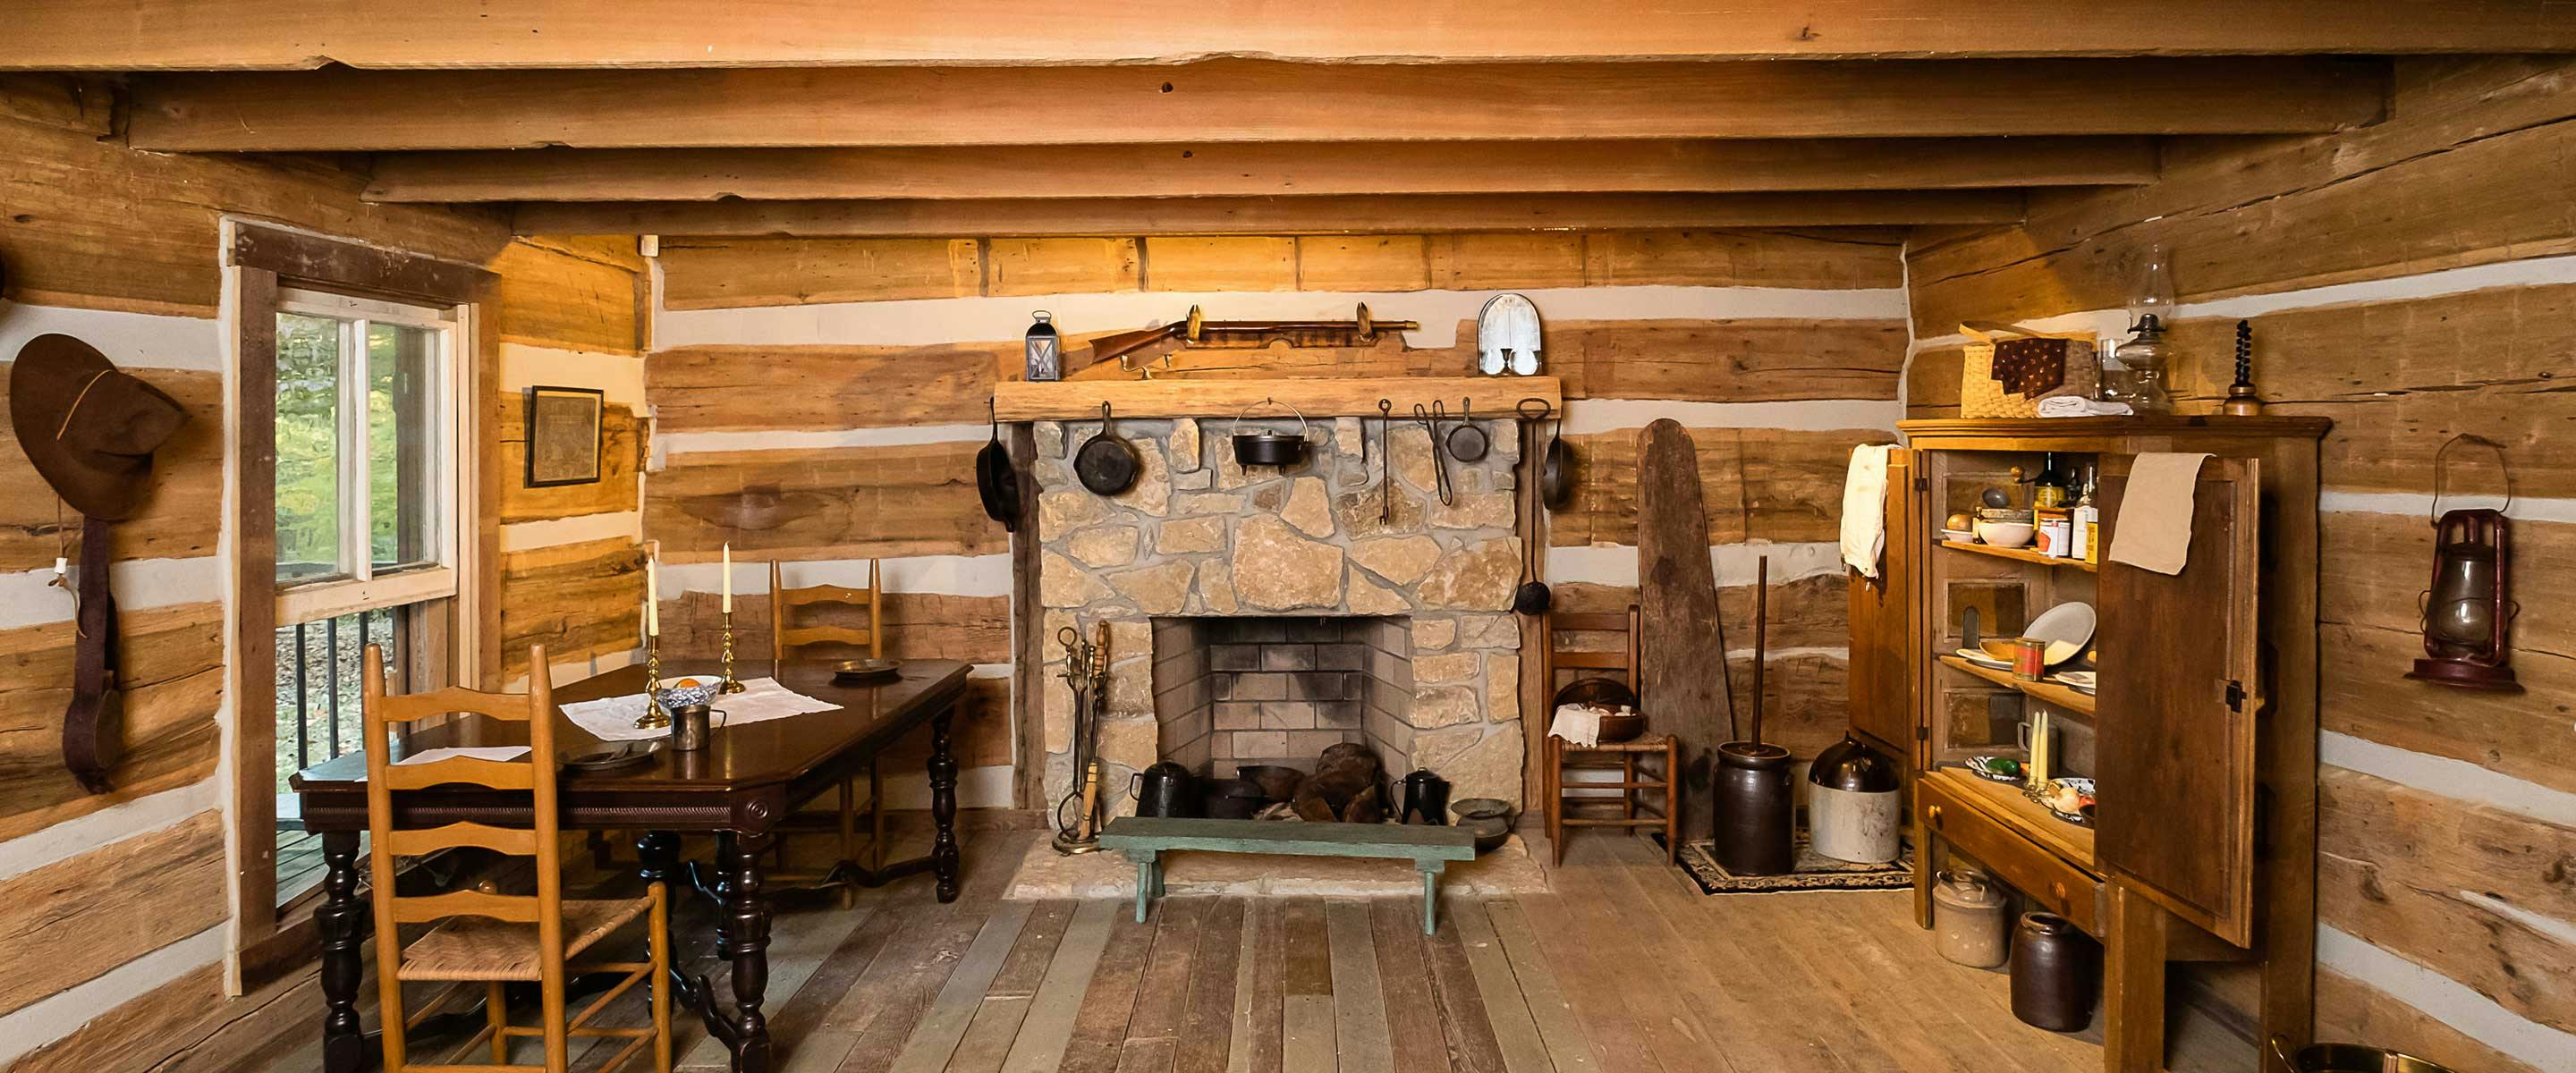 interior view of cabin just as it would have been pre-civil war